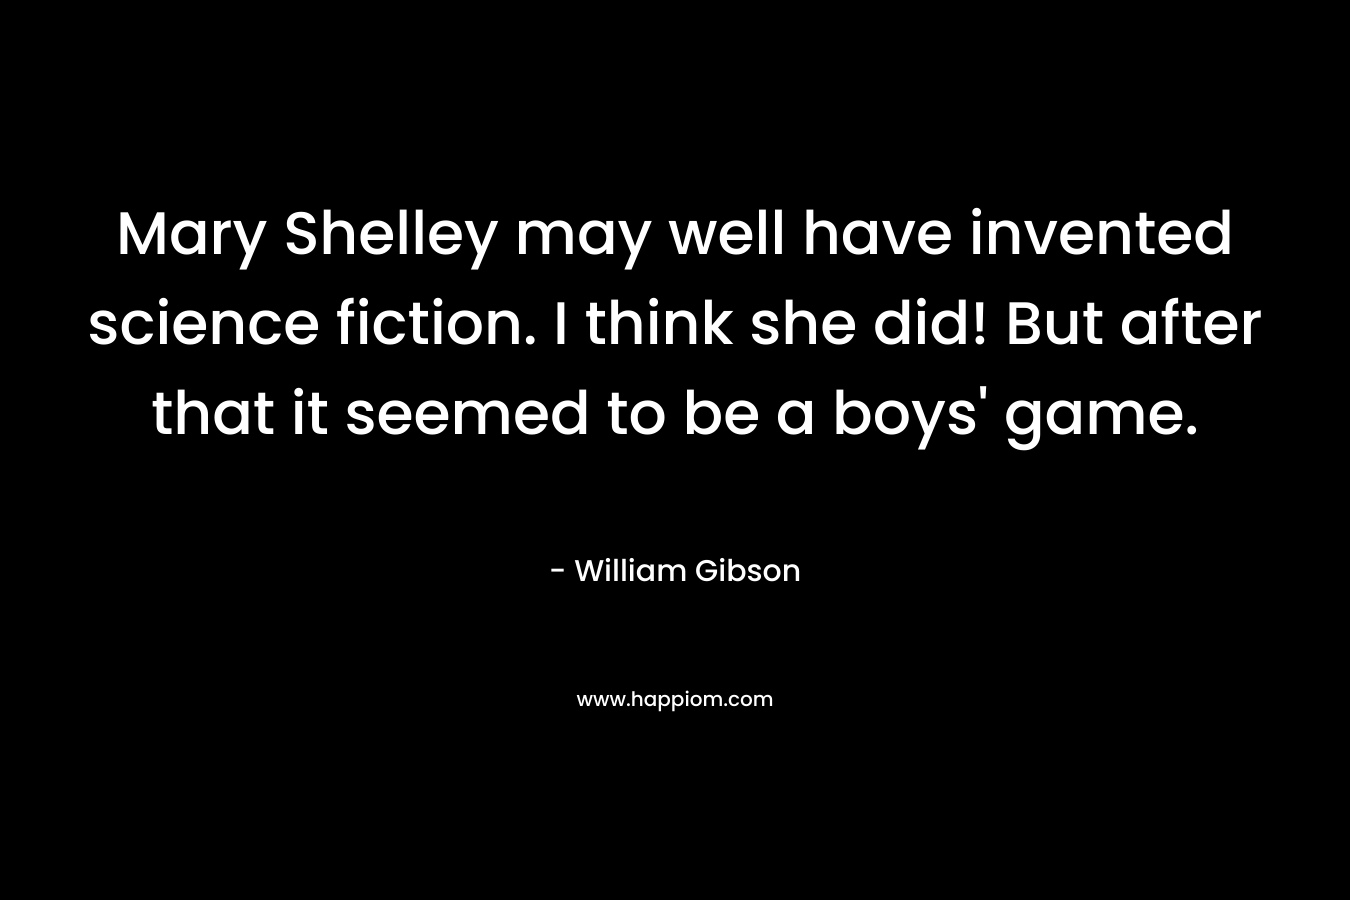 Mary Shelley may well have invented science fiction. I think she did! But after that it seemed to be a boys’ game. – William Gibson